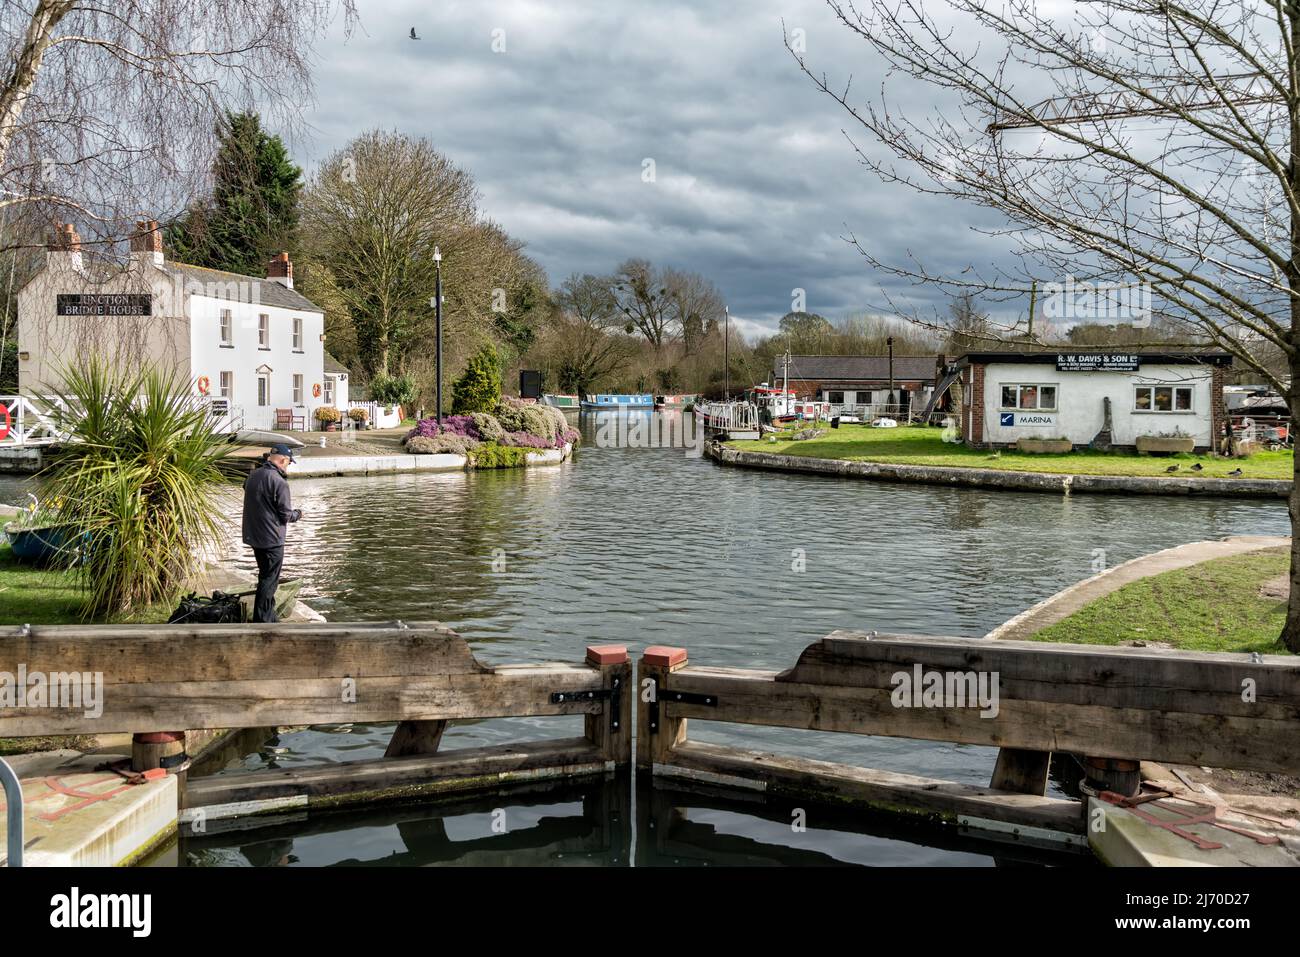 Saul Junction with the Stroudwater Canal and the Gloucester-Sharpness Ship Canal, Gloucestertshire, United Kingdom Stock Photo